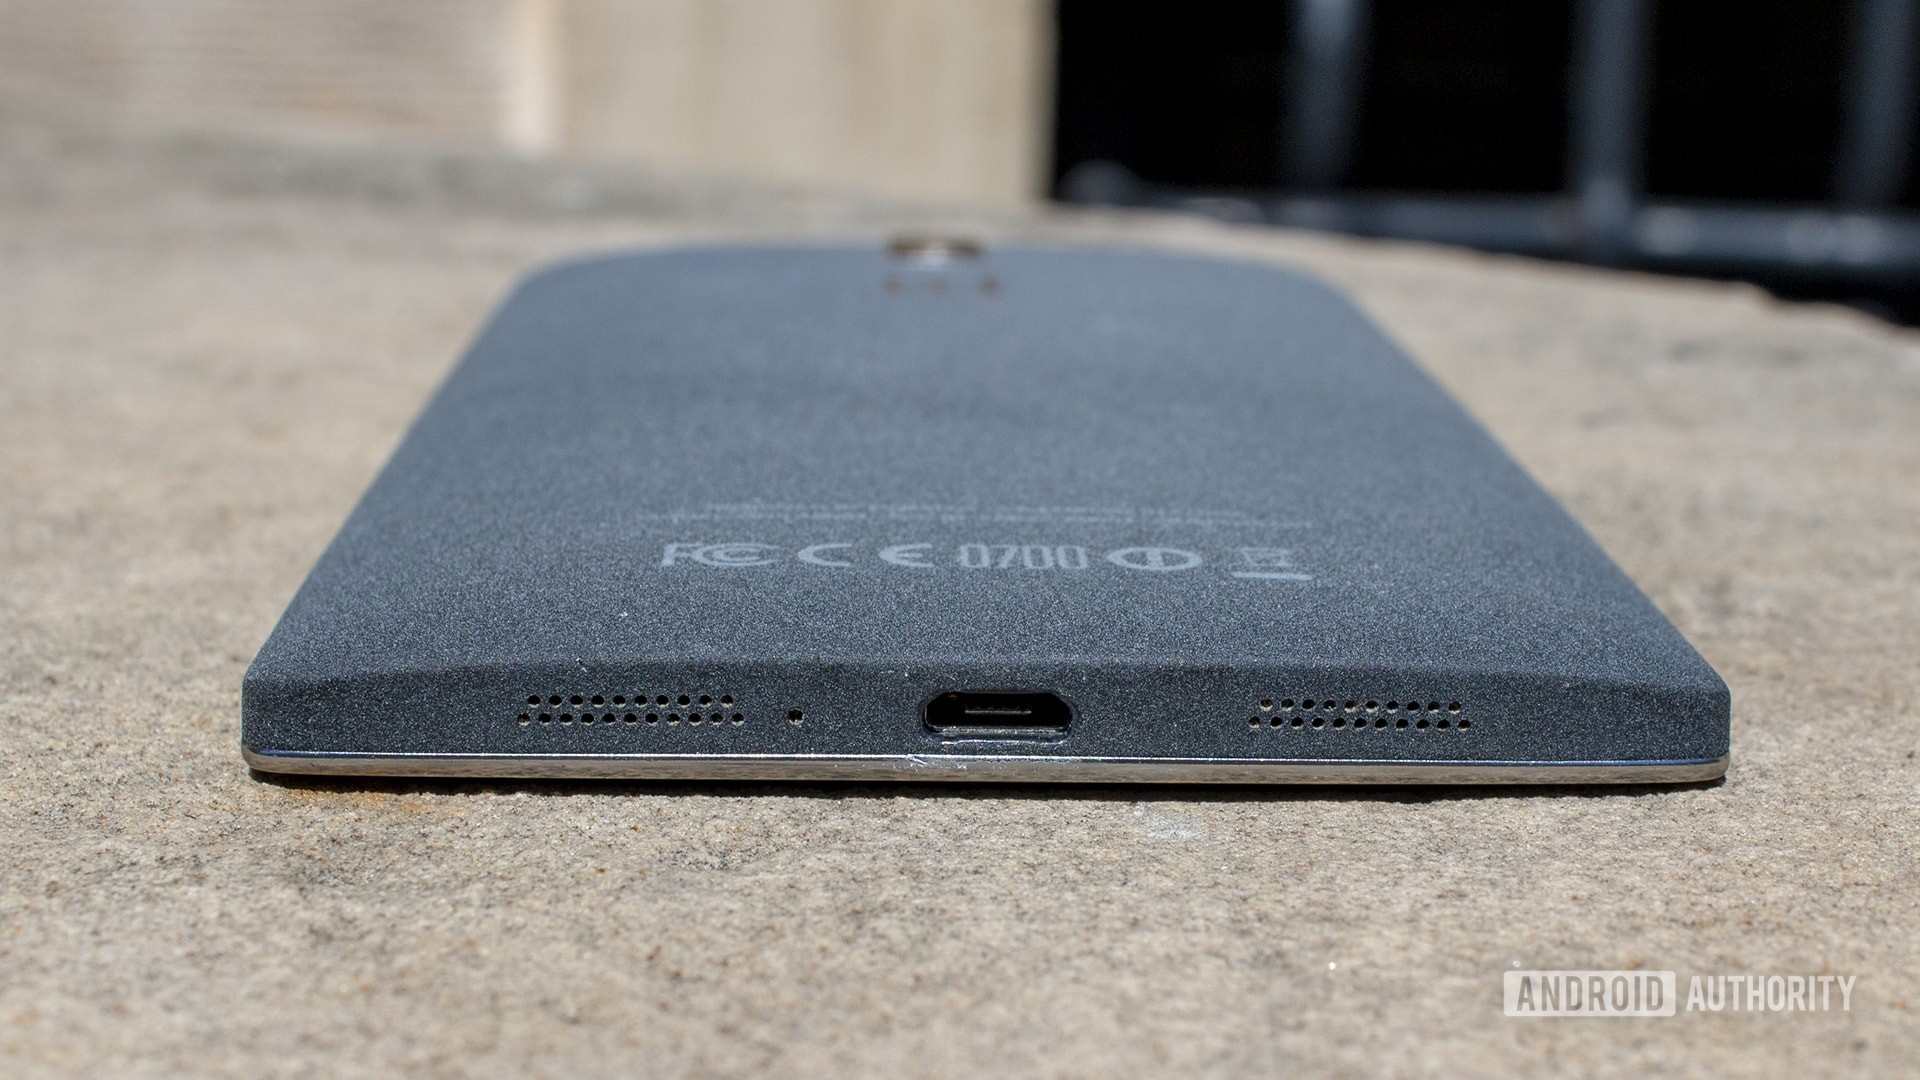 The bottom of the OnePlus One showing its micro-USB port.